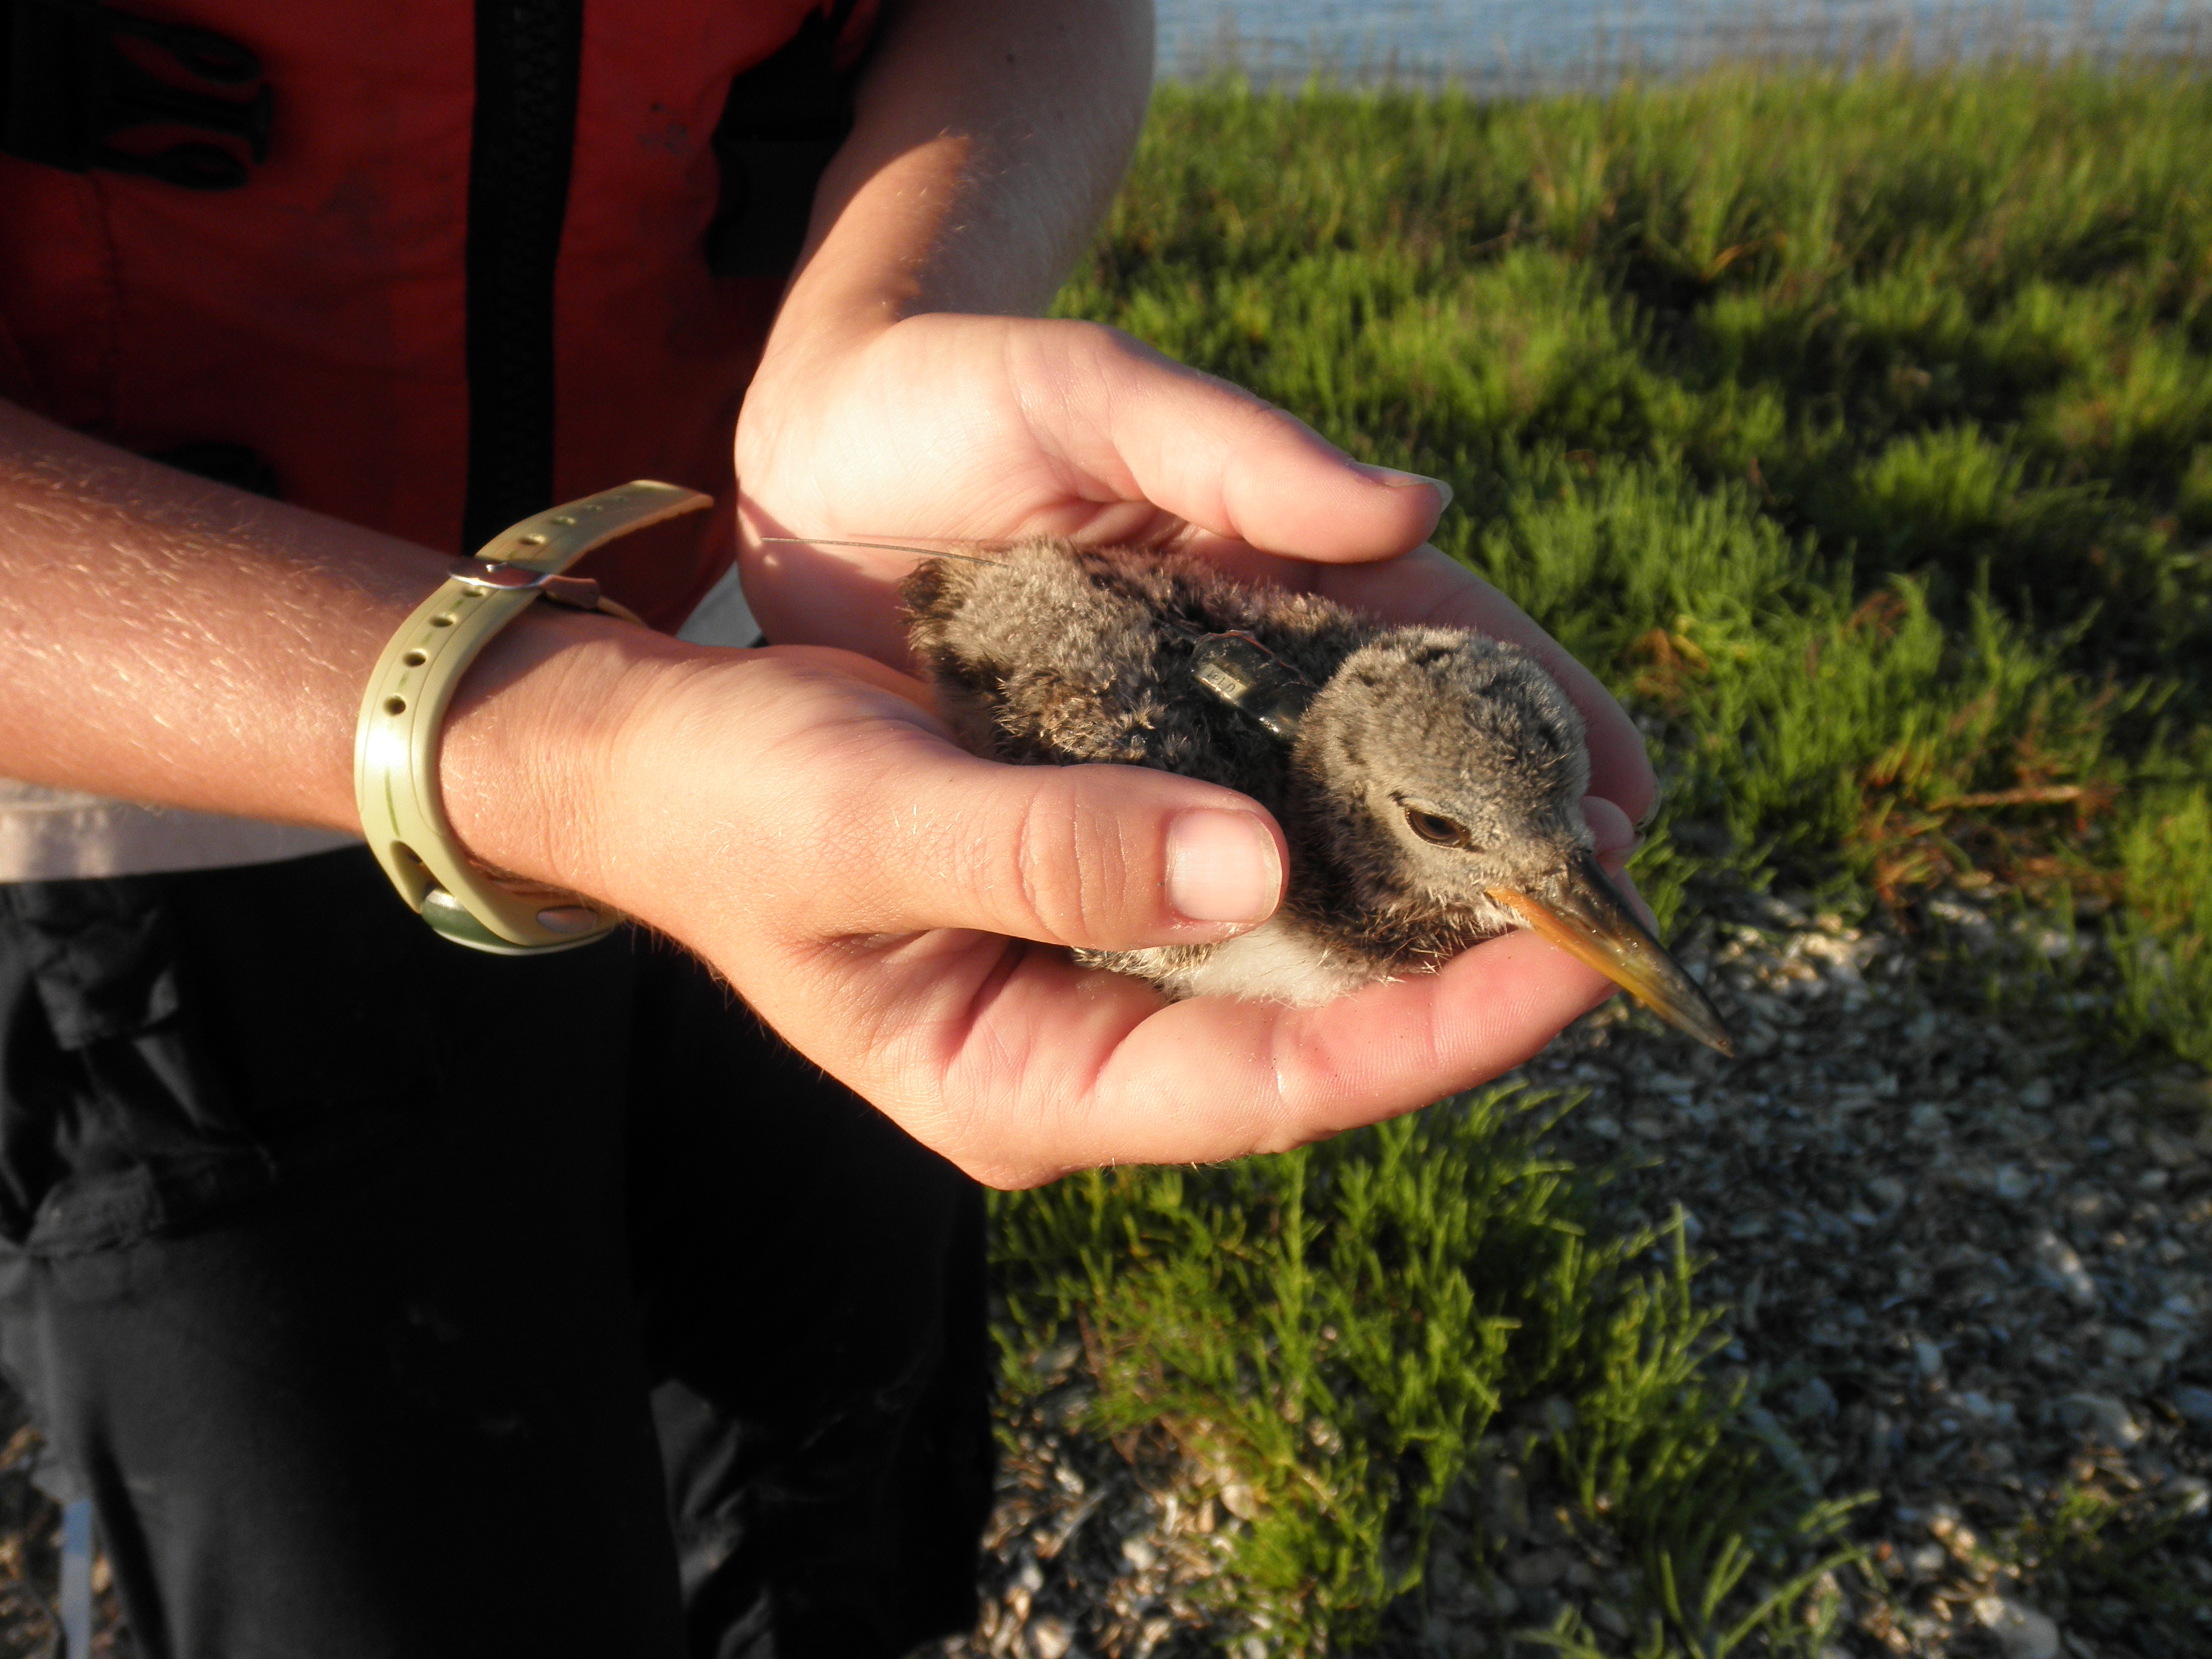 Researcher holds an American oystercatcher chick in hands. A small transmitter for tracking is on the chick.